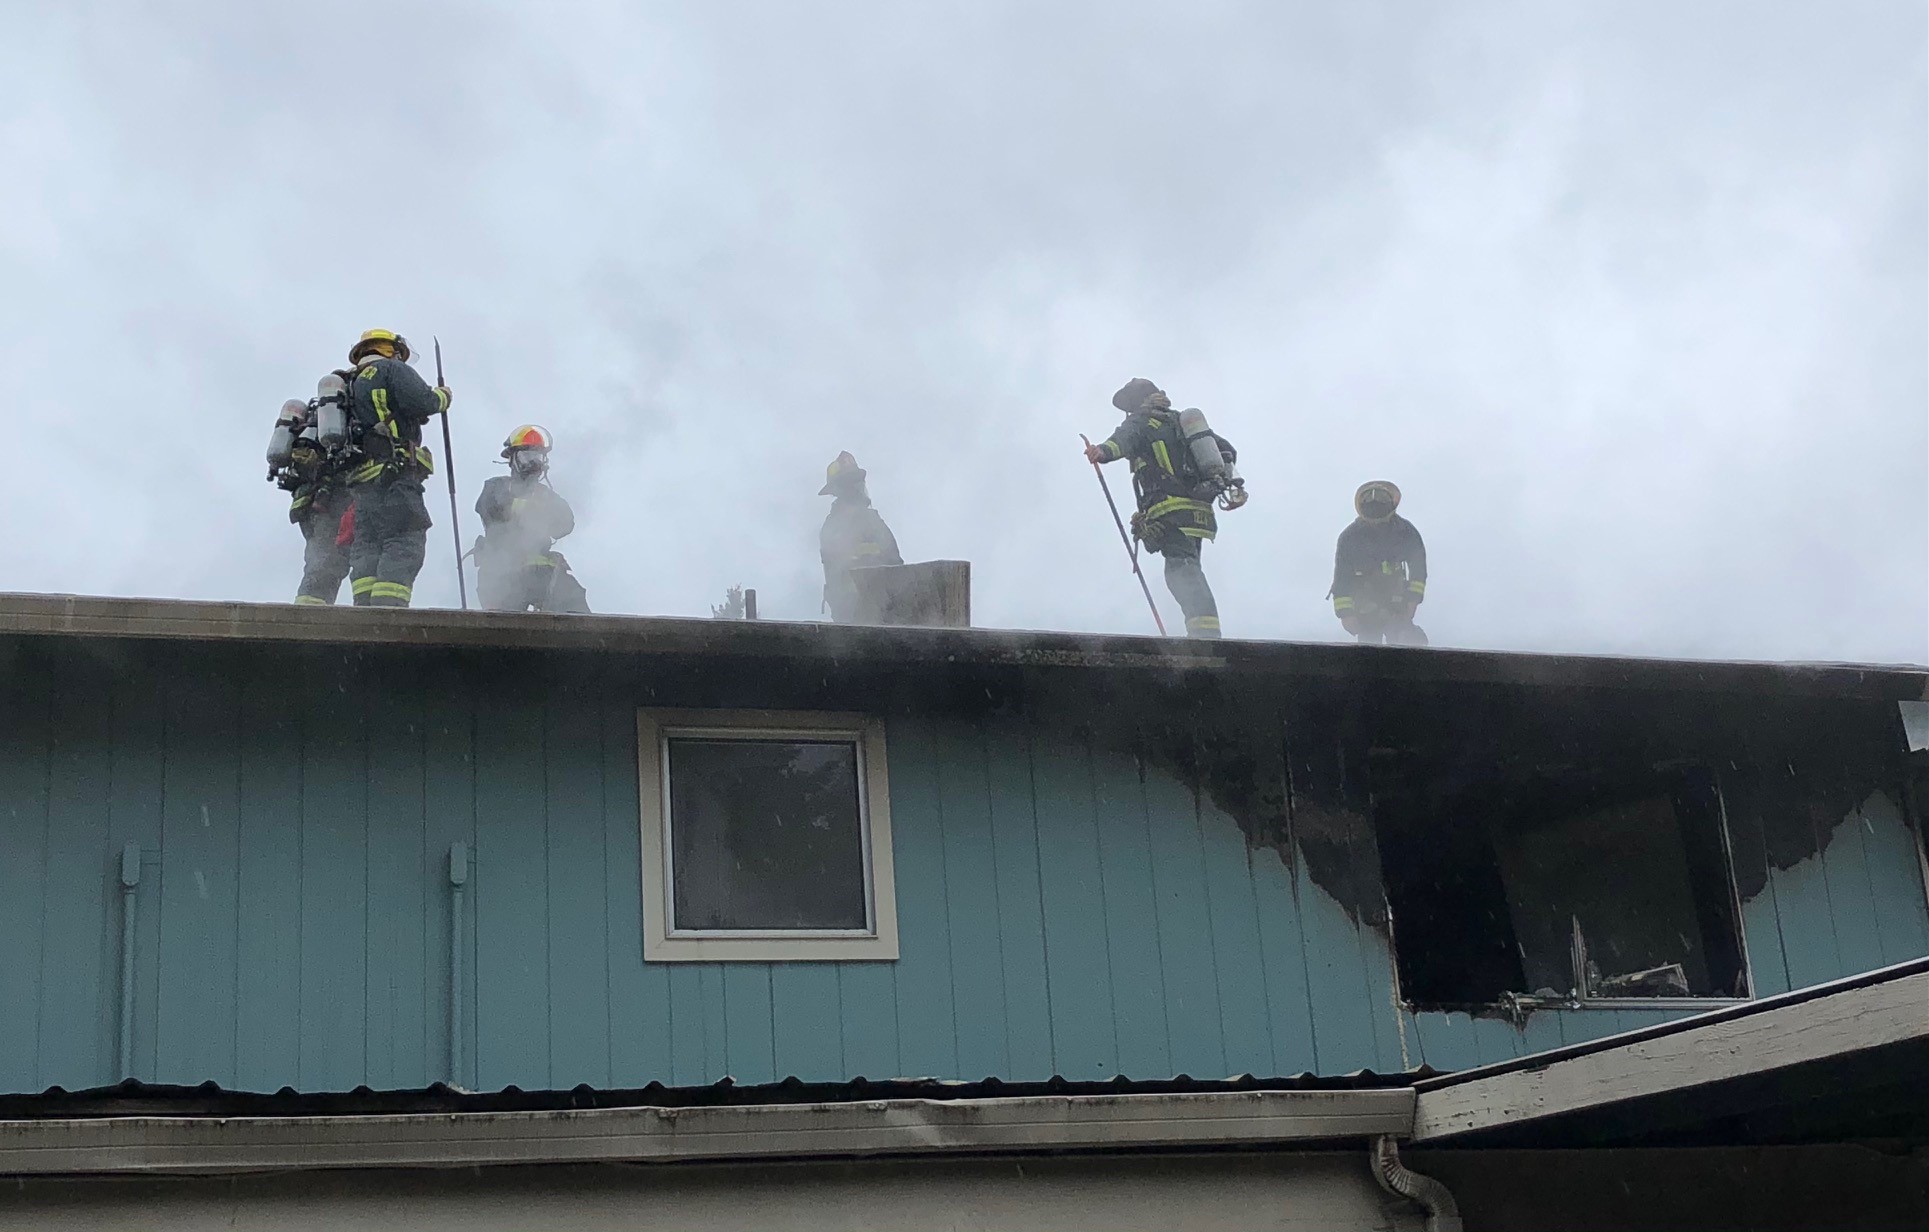 Vancouver firefighters battled a second-story apartment fire Monday afternoon in the Harney Heights neighborhood.